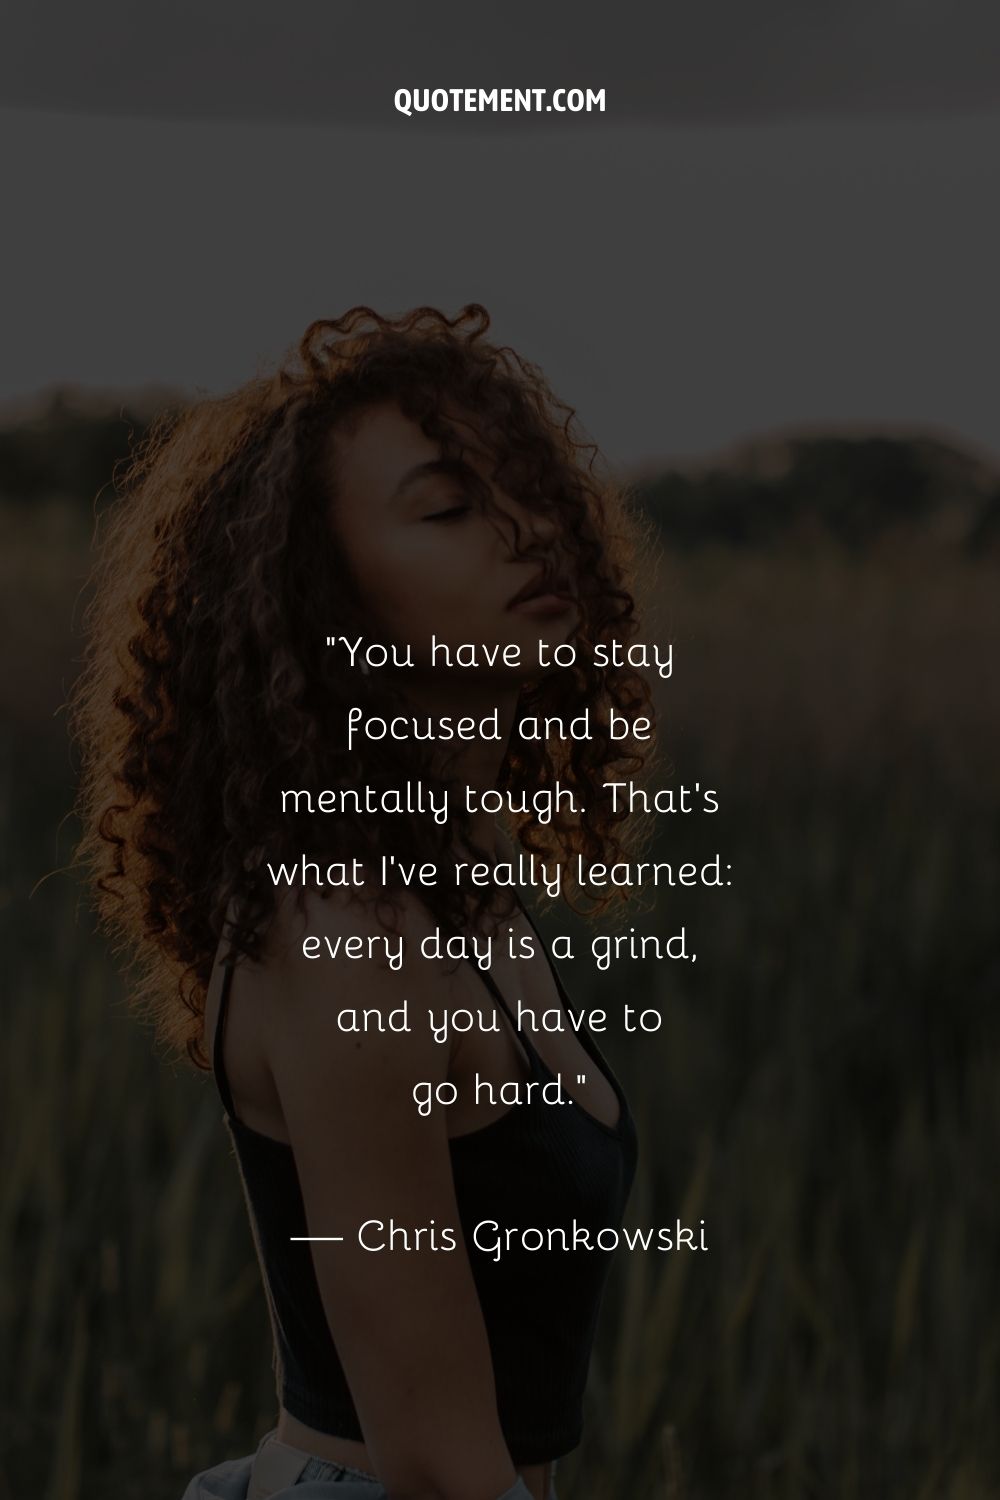 A curly-haired woman standing in a field representing an inspiring grind quote
